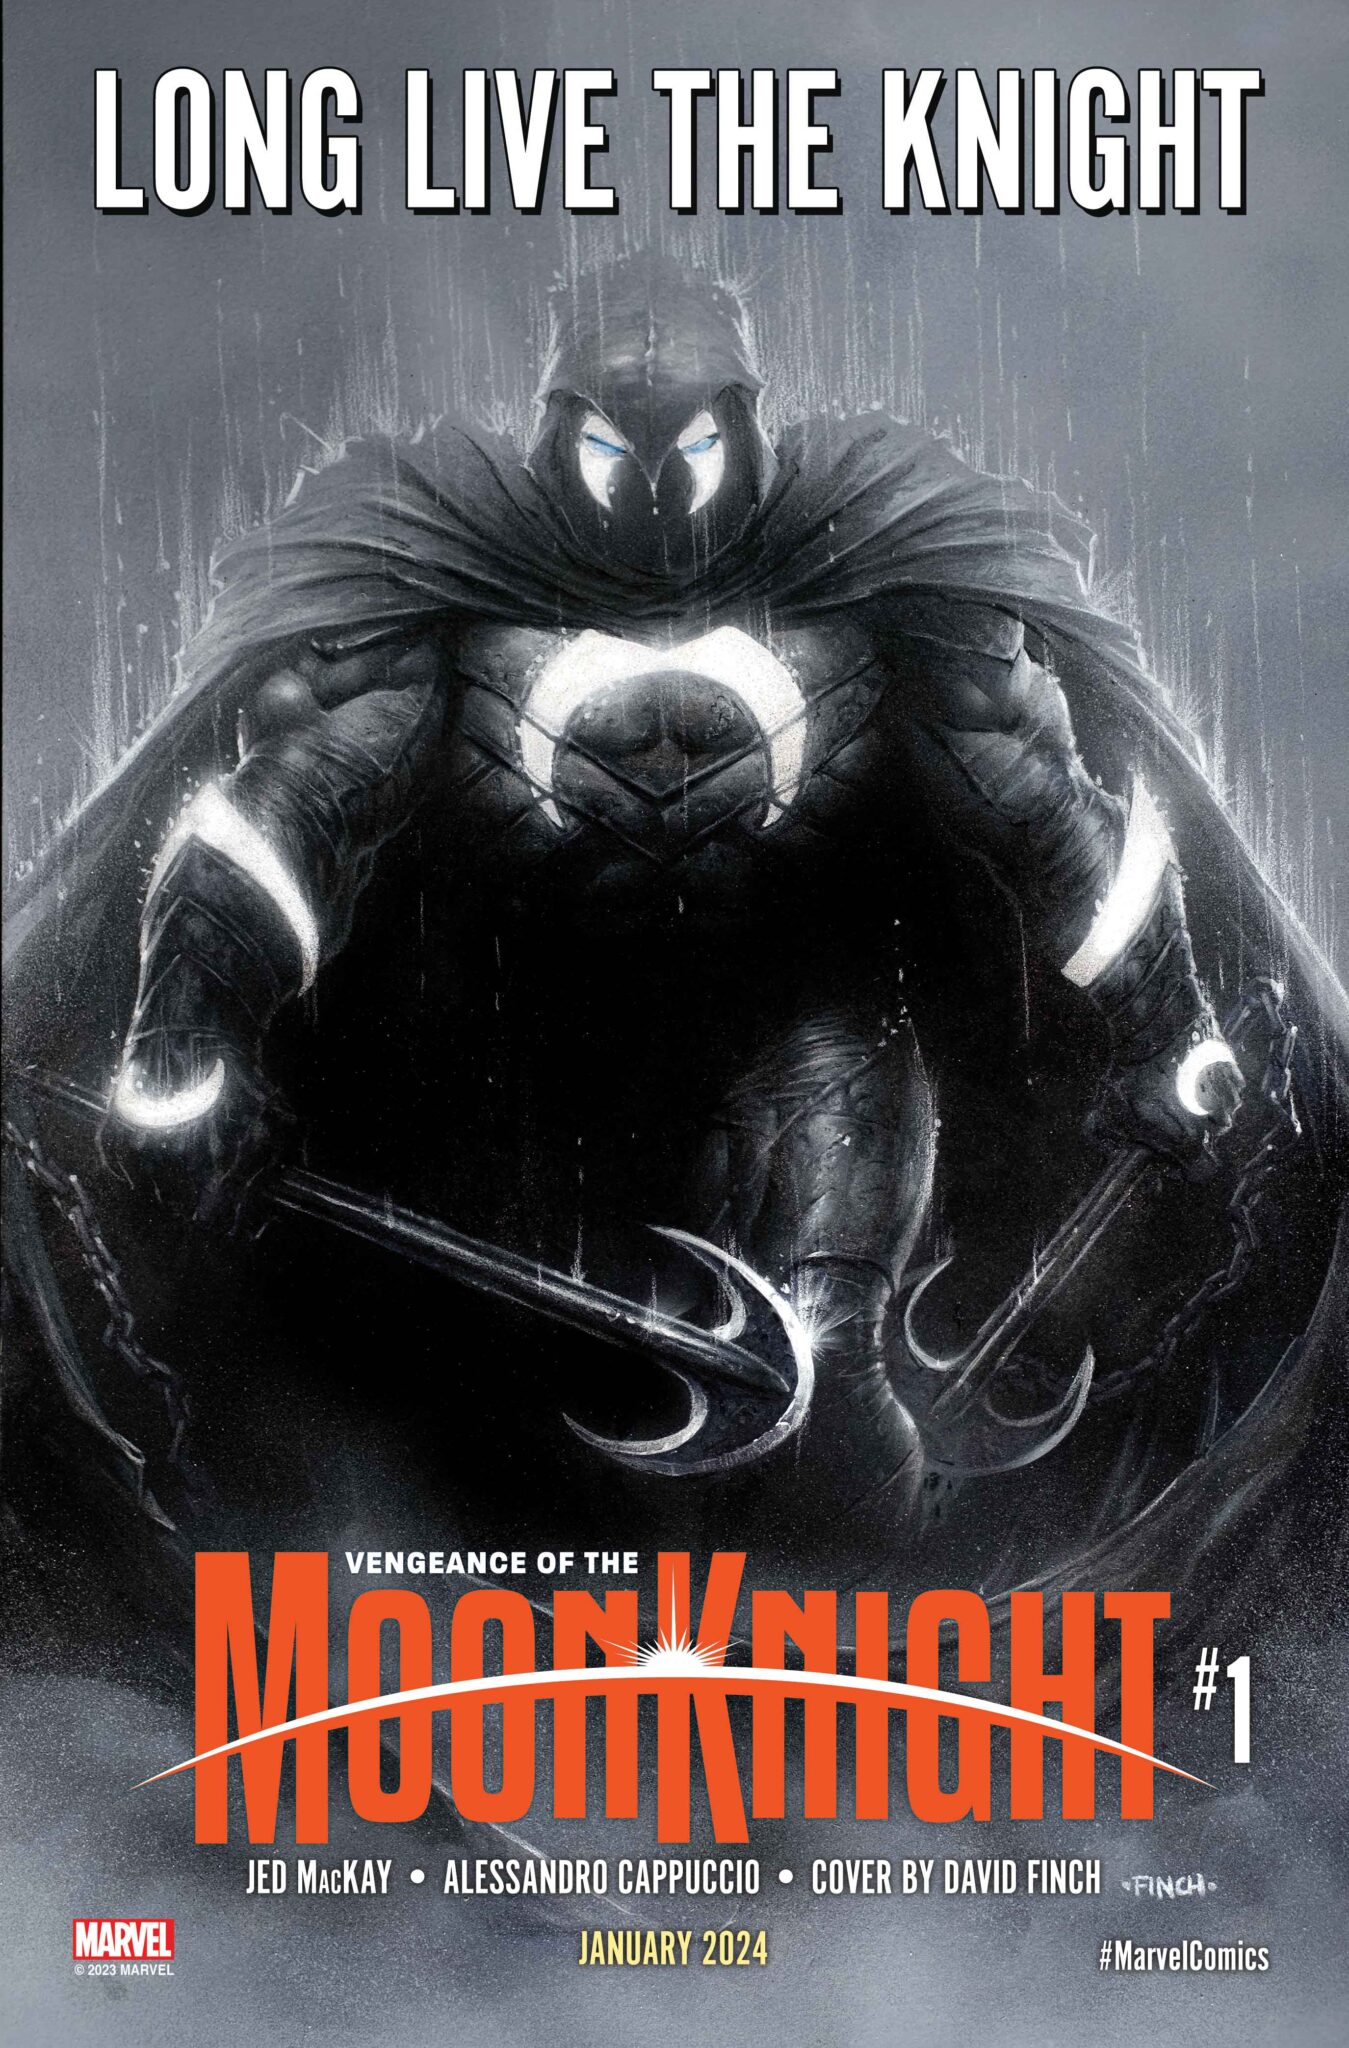 Vengeance of the Moon Knight #1 cover